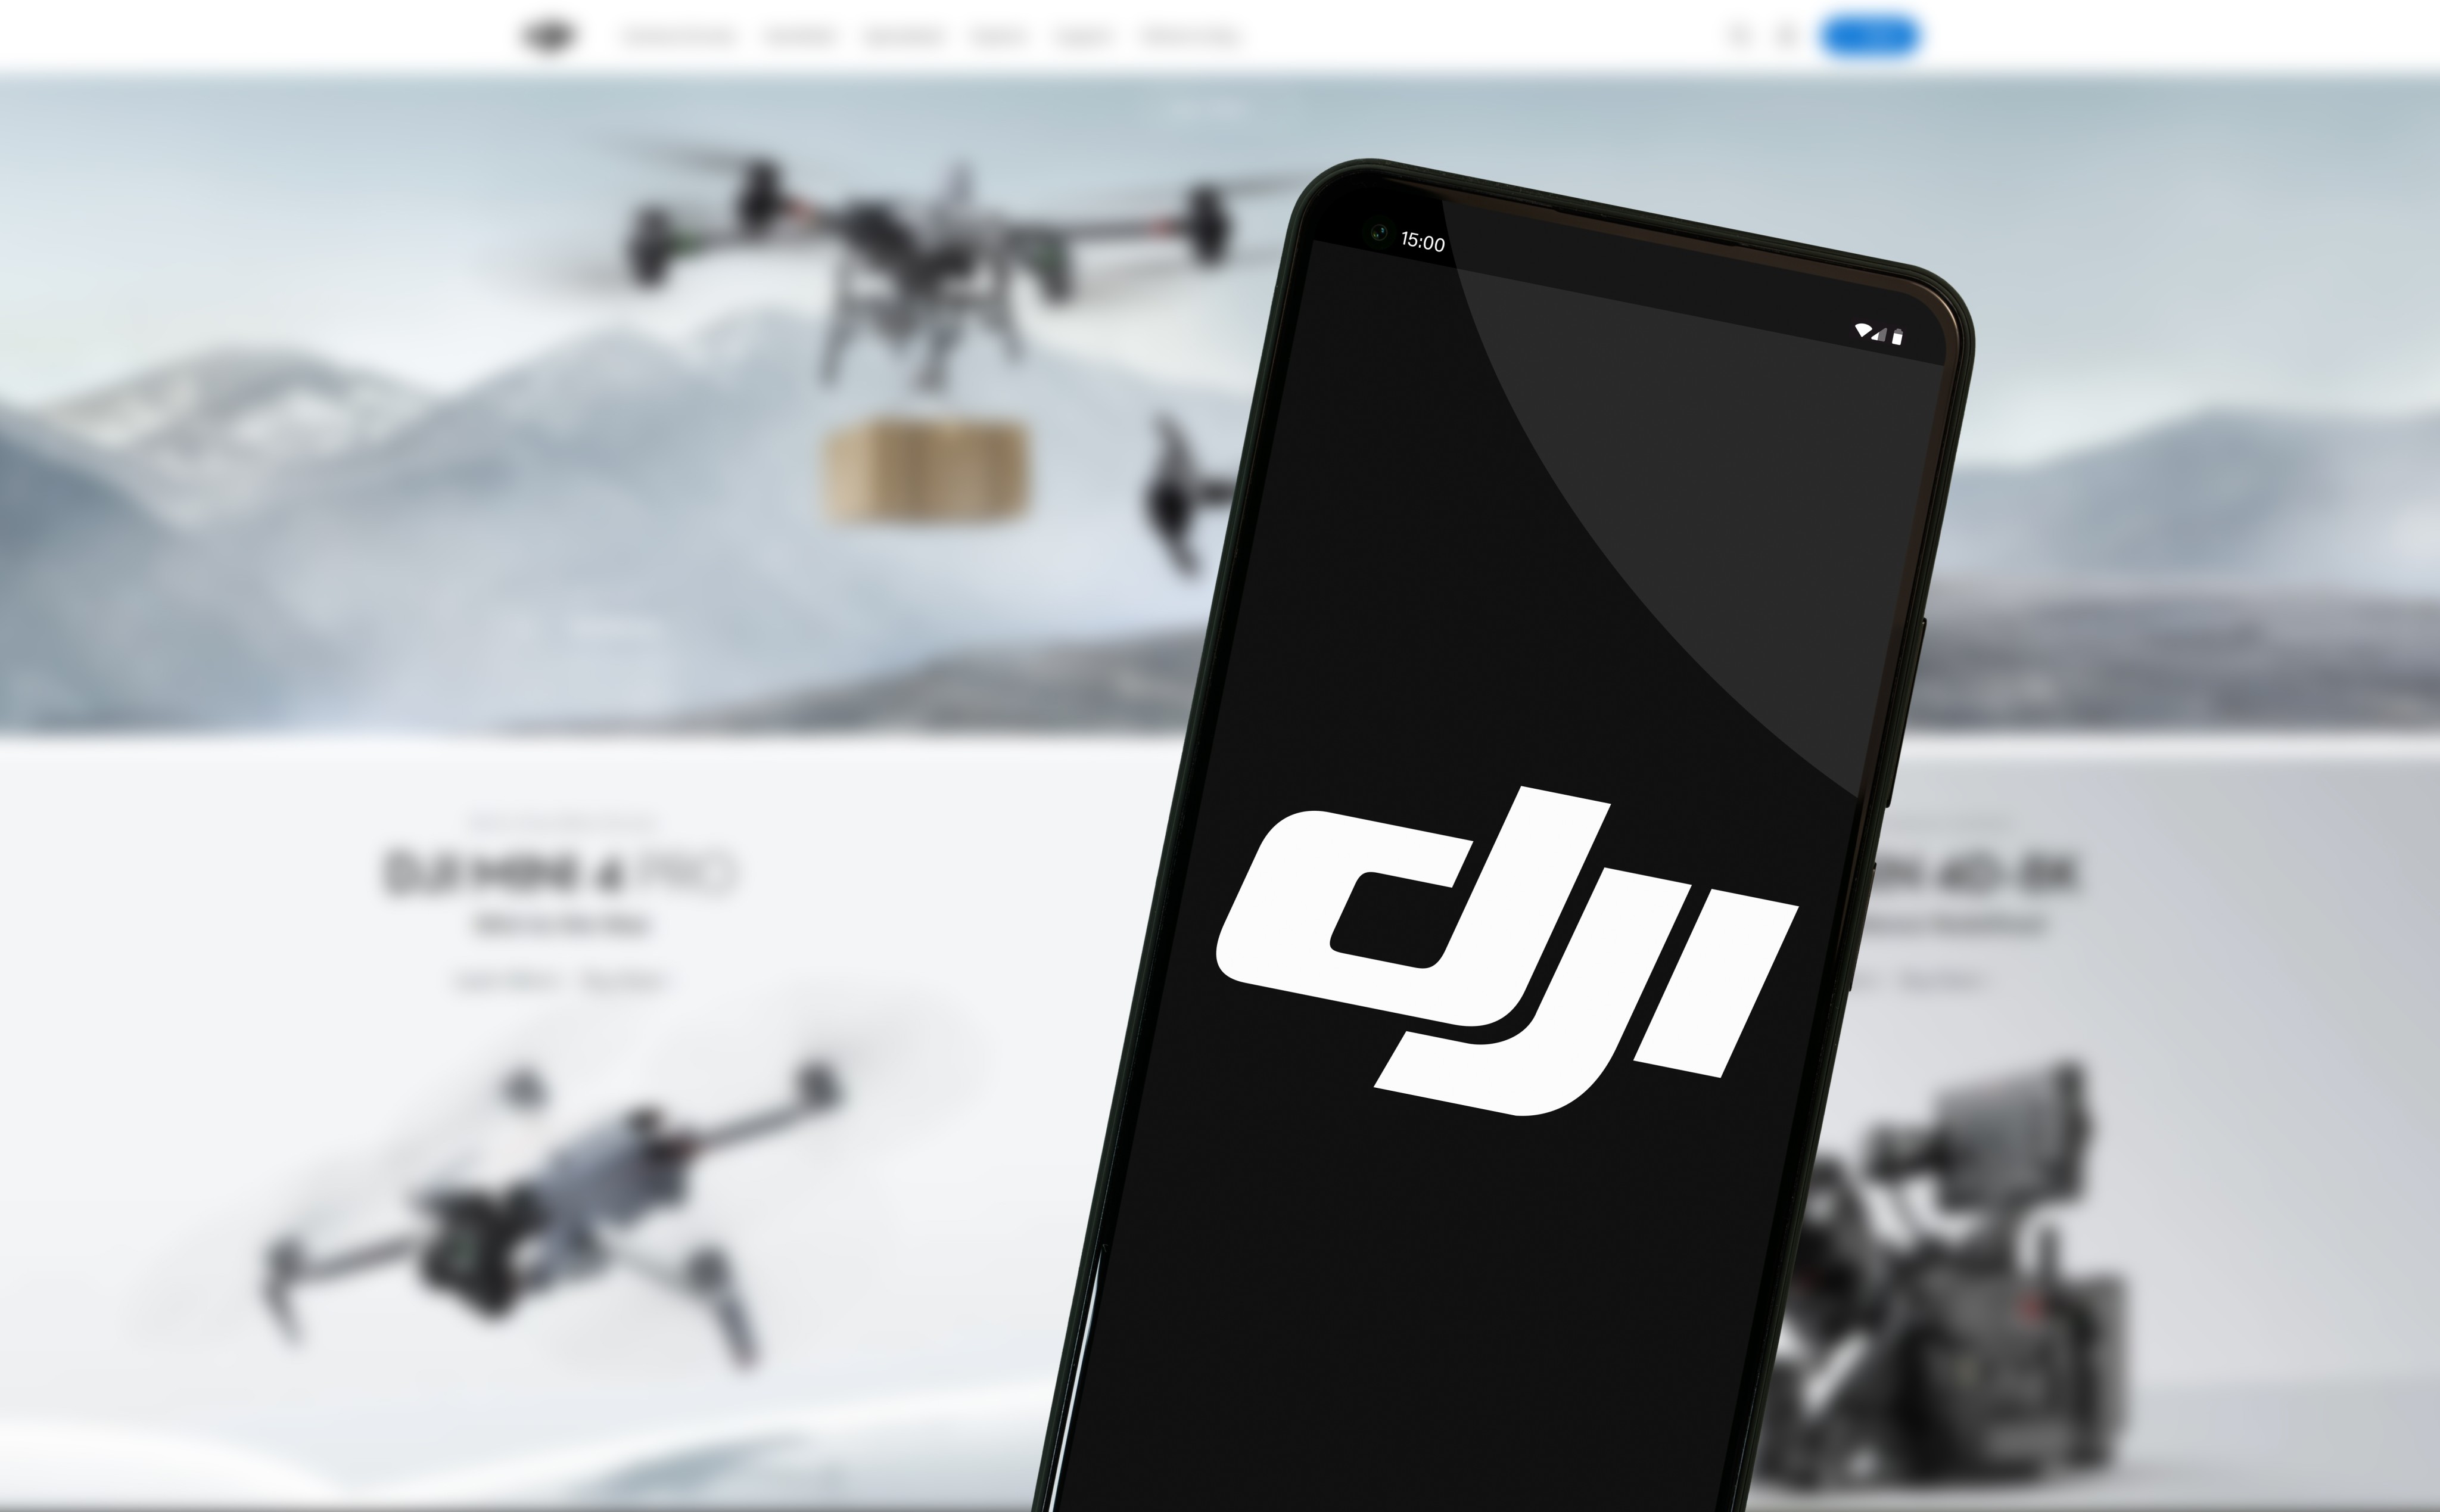 The DJI logo on a smartphone screen in front of the company’s website. Photo: Shutterstock Images